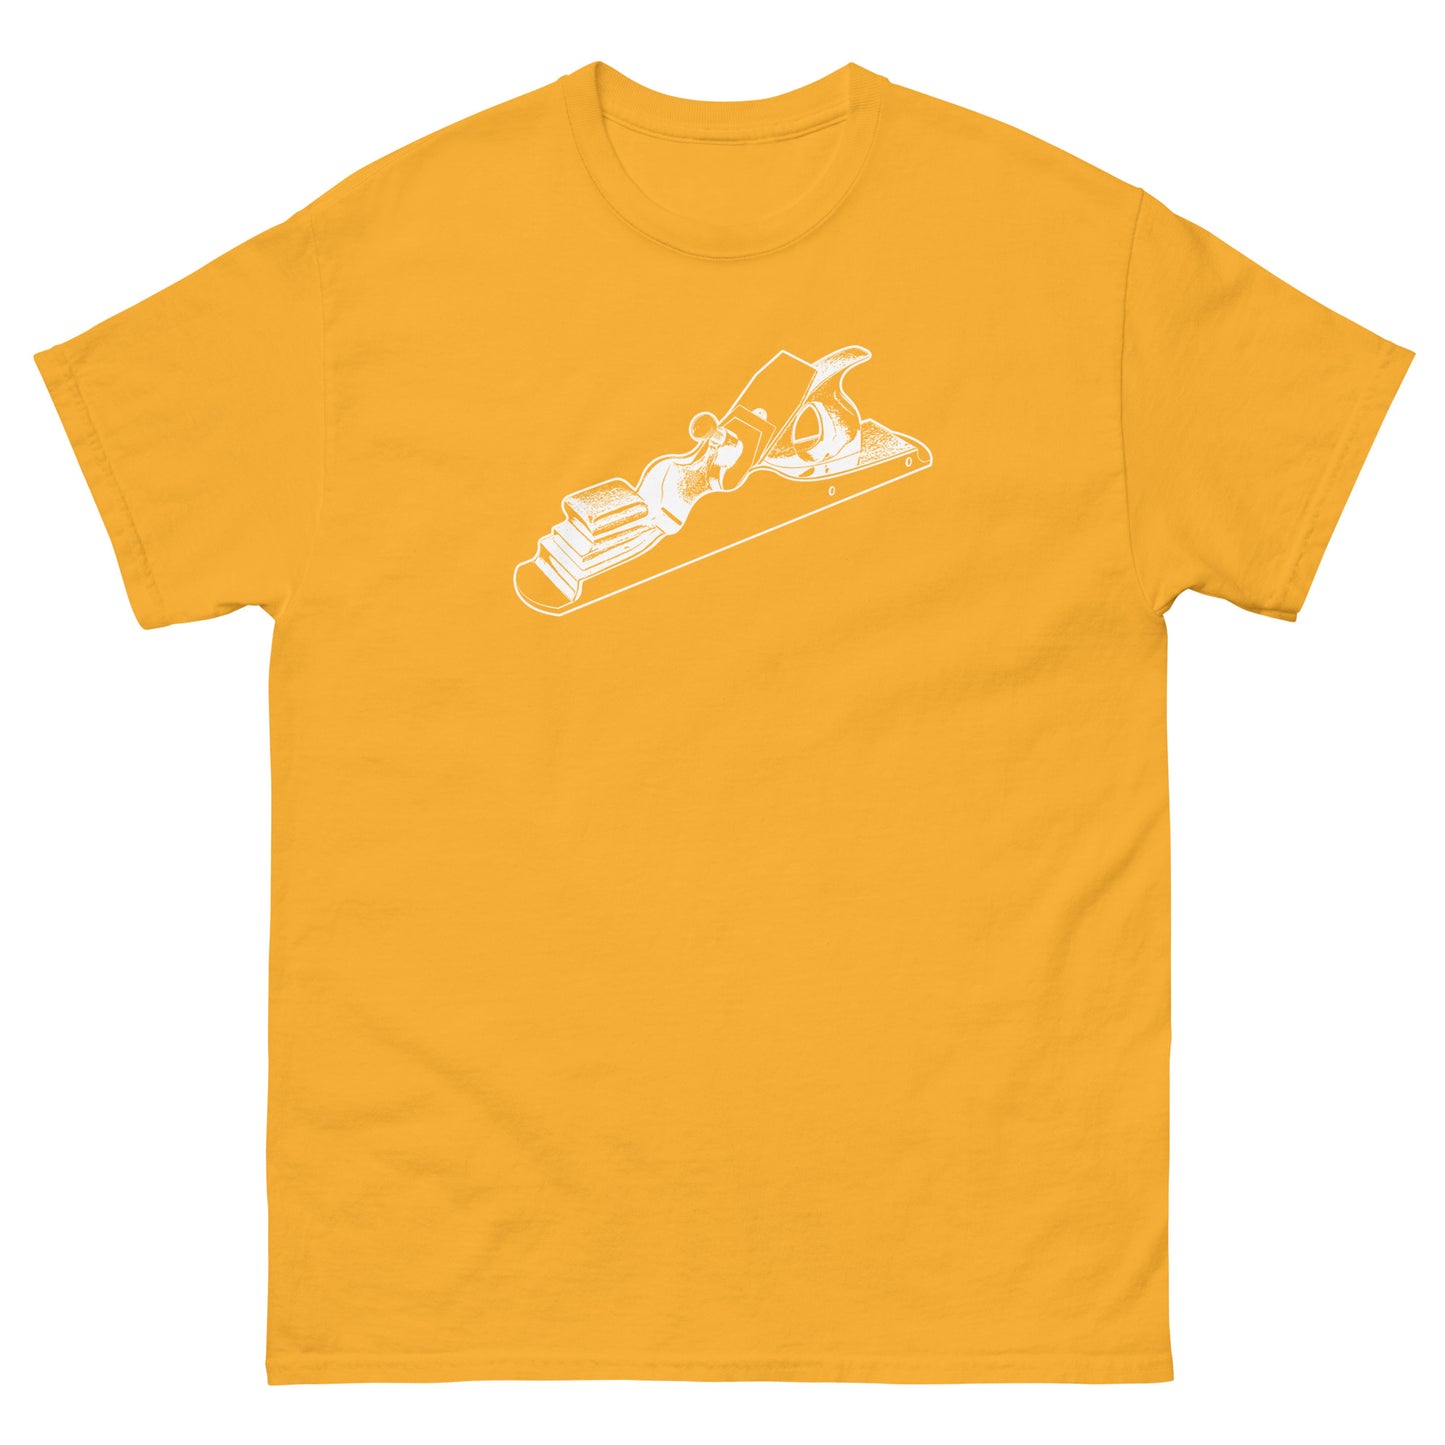 Scottish Infill Hand Plane Woodworking T-Shirt (Multiple Colors)